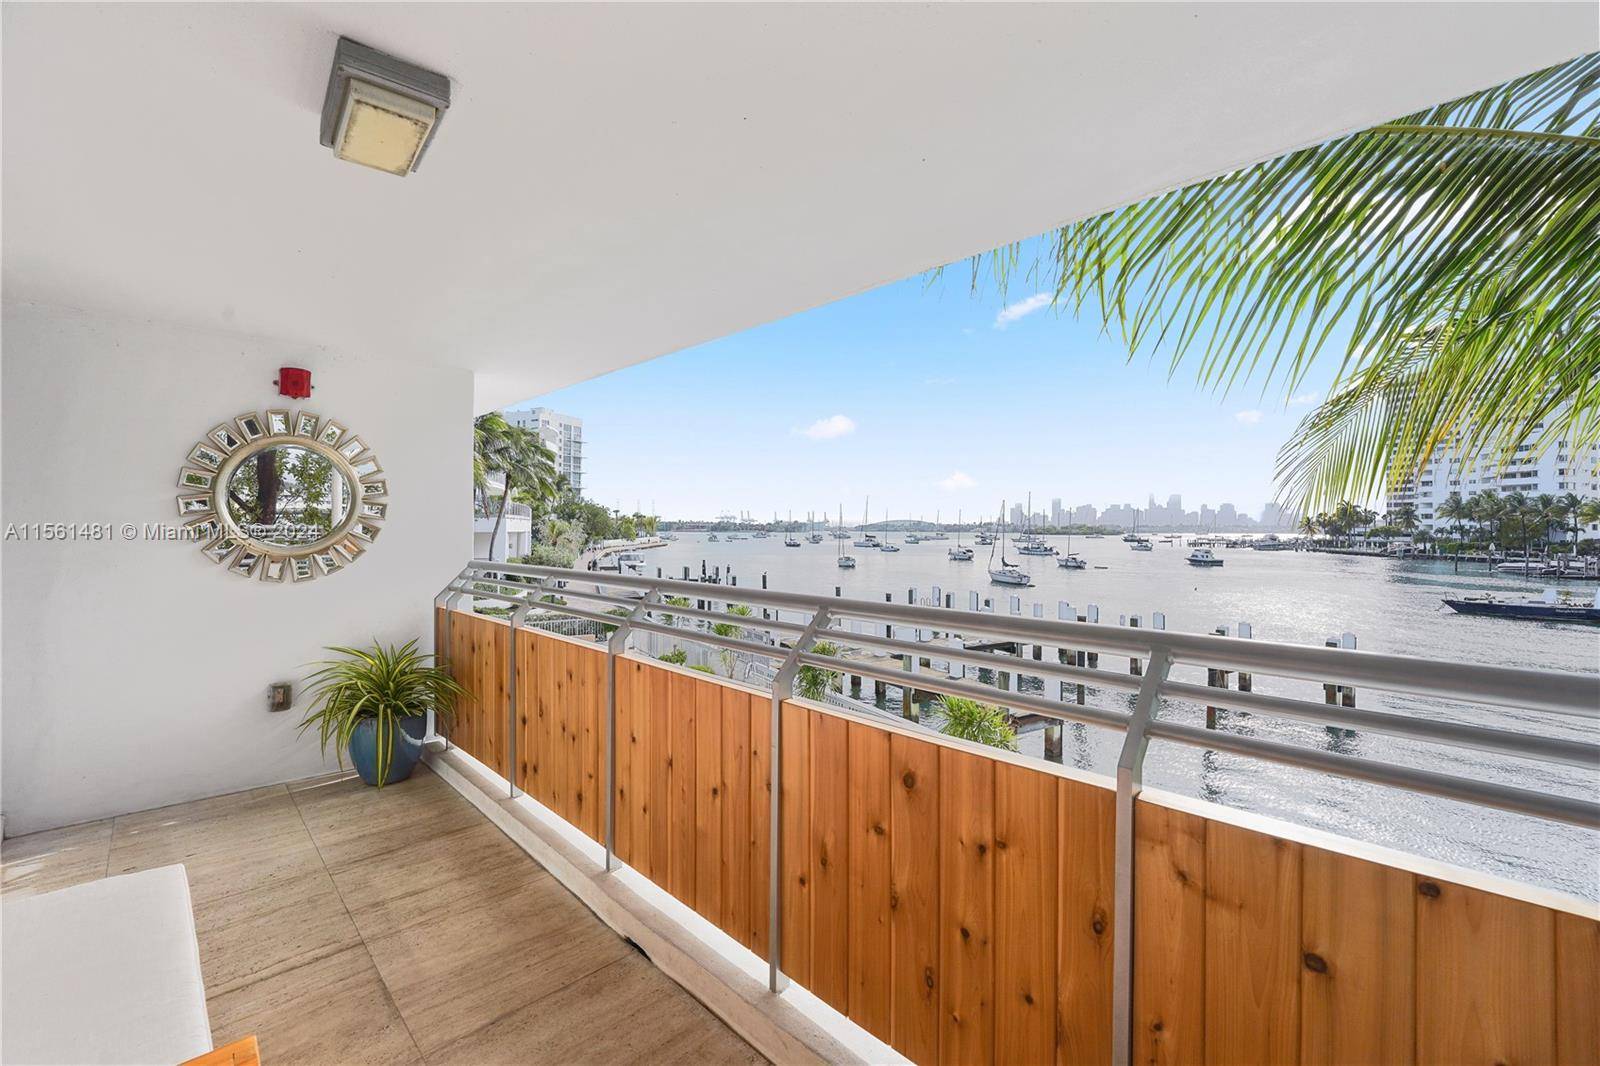 Luxury bayfront corner unit, remodeled and fully furnished, featuring a large covered terrace overlooking the bay and panoramic views of the Miami skyline and sunsets.